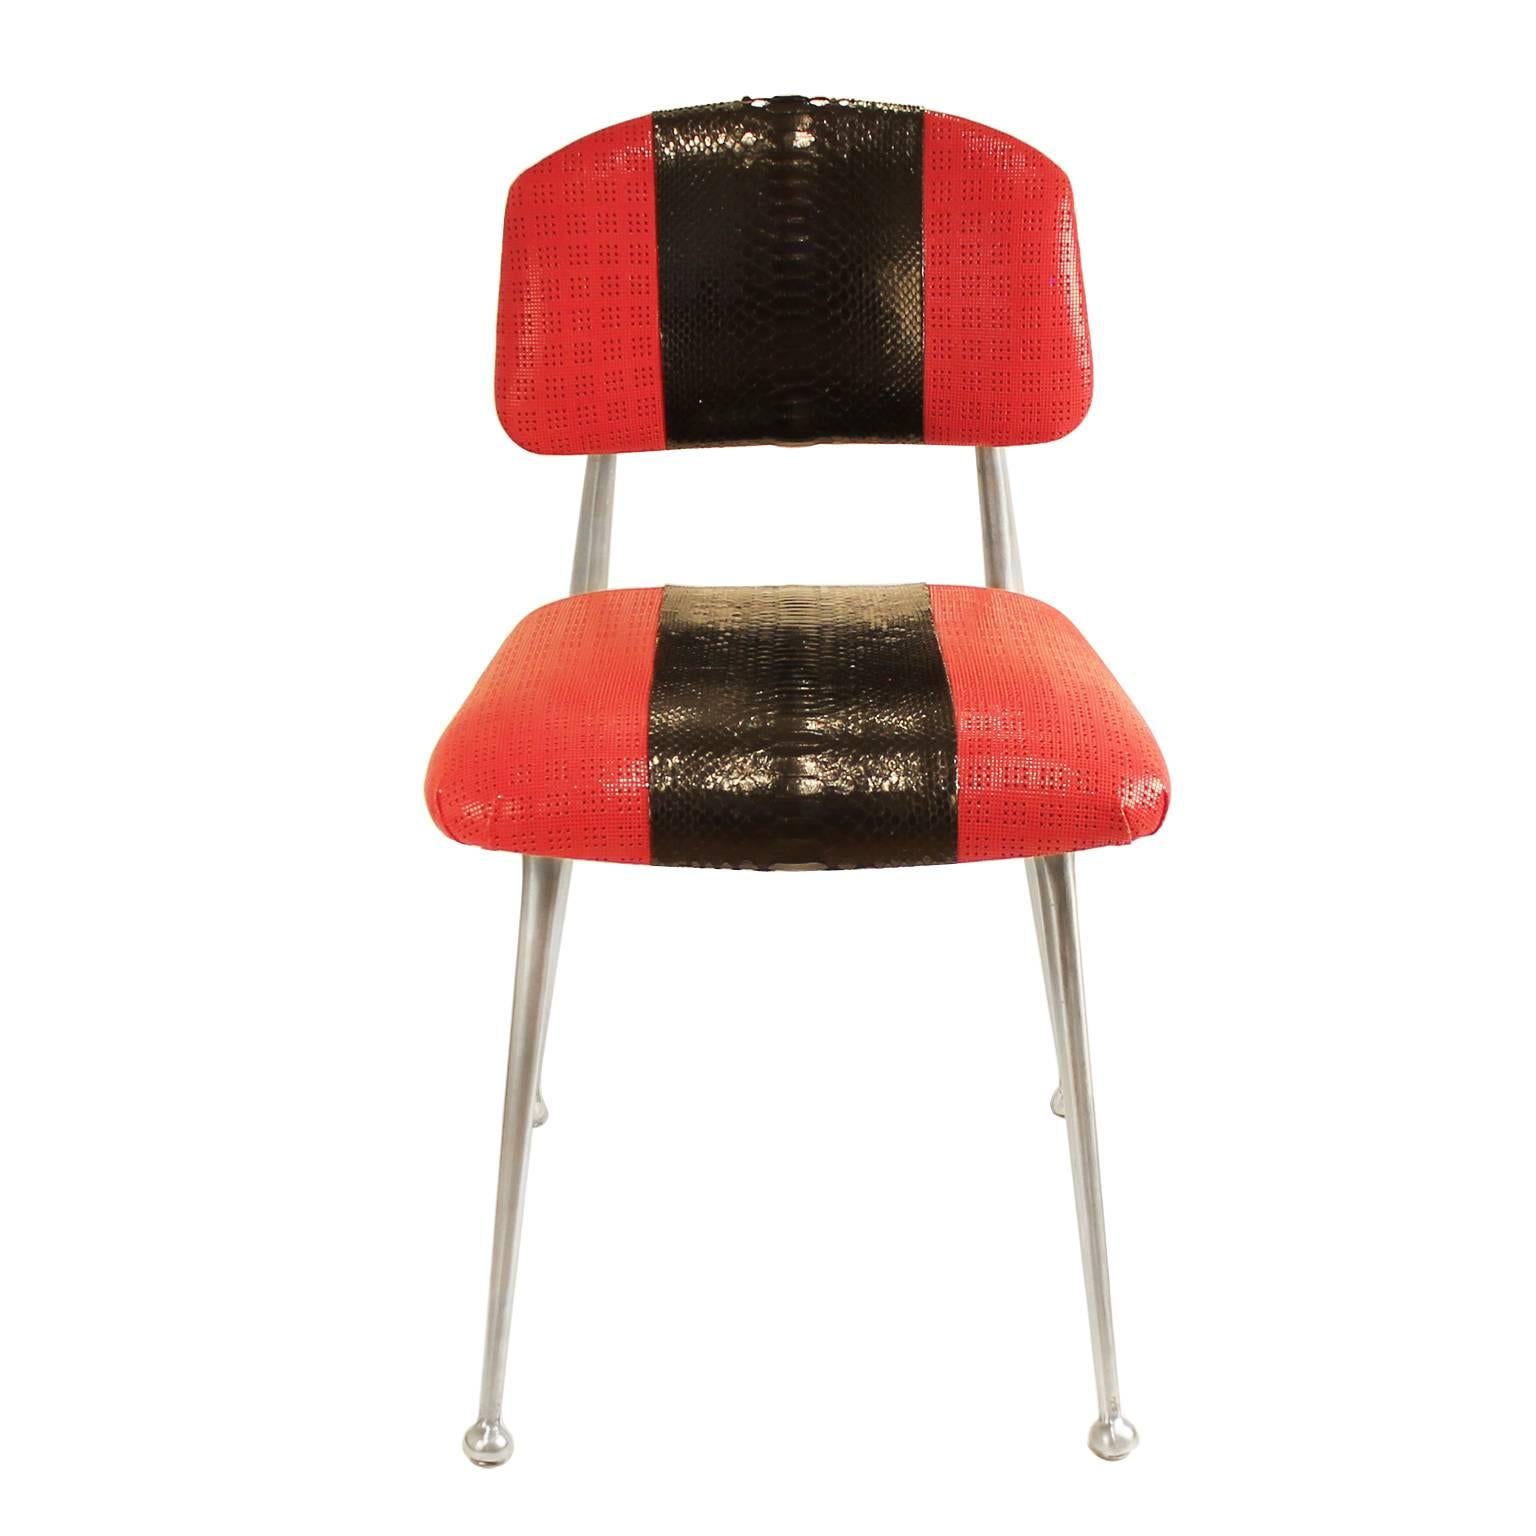 This is an exquisite accent vintage gazelle chair attributable to Shelby Williams recently reupholstered with black python and lipstick red perforated lambskin leather. The center racing stripe in python contrasts starkly against the perforated